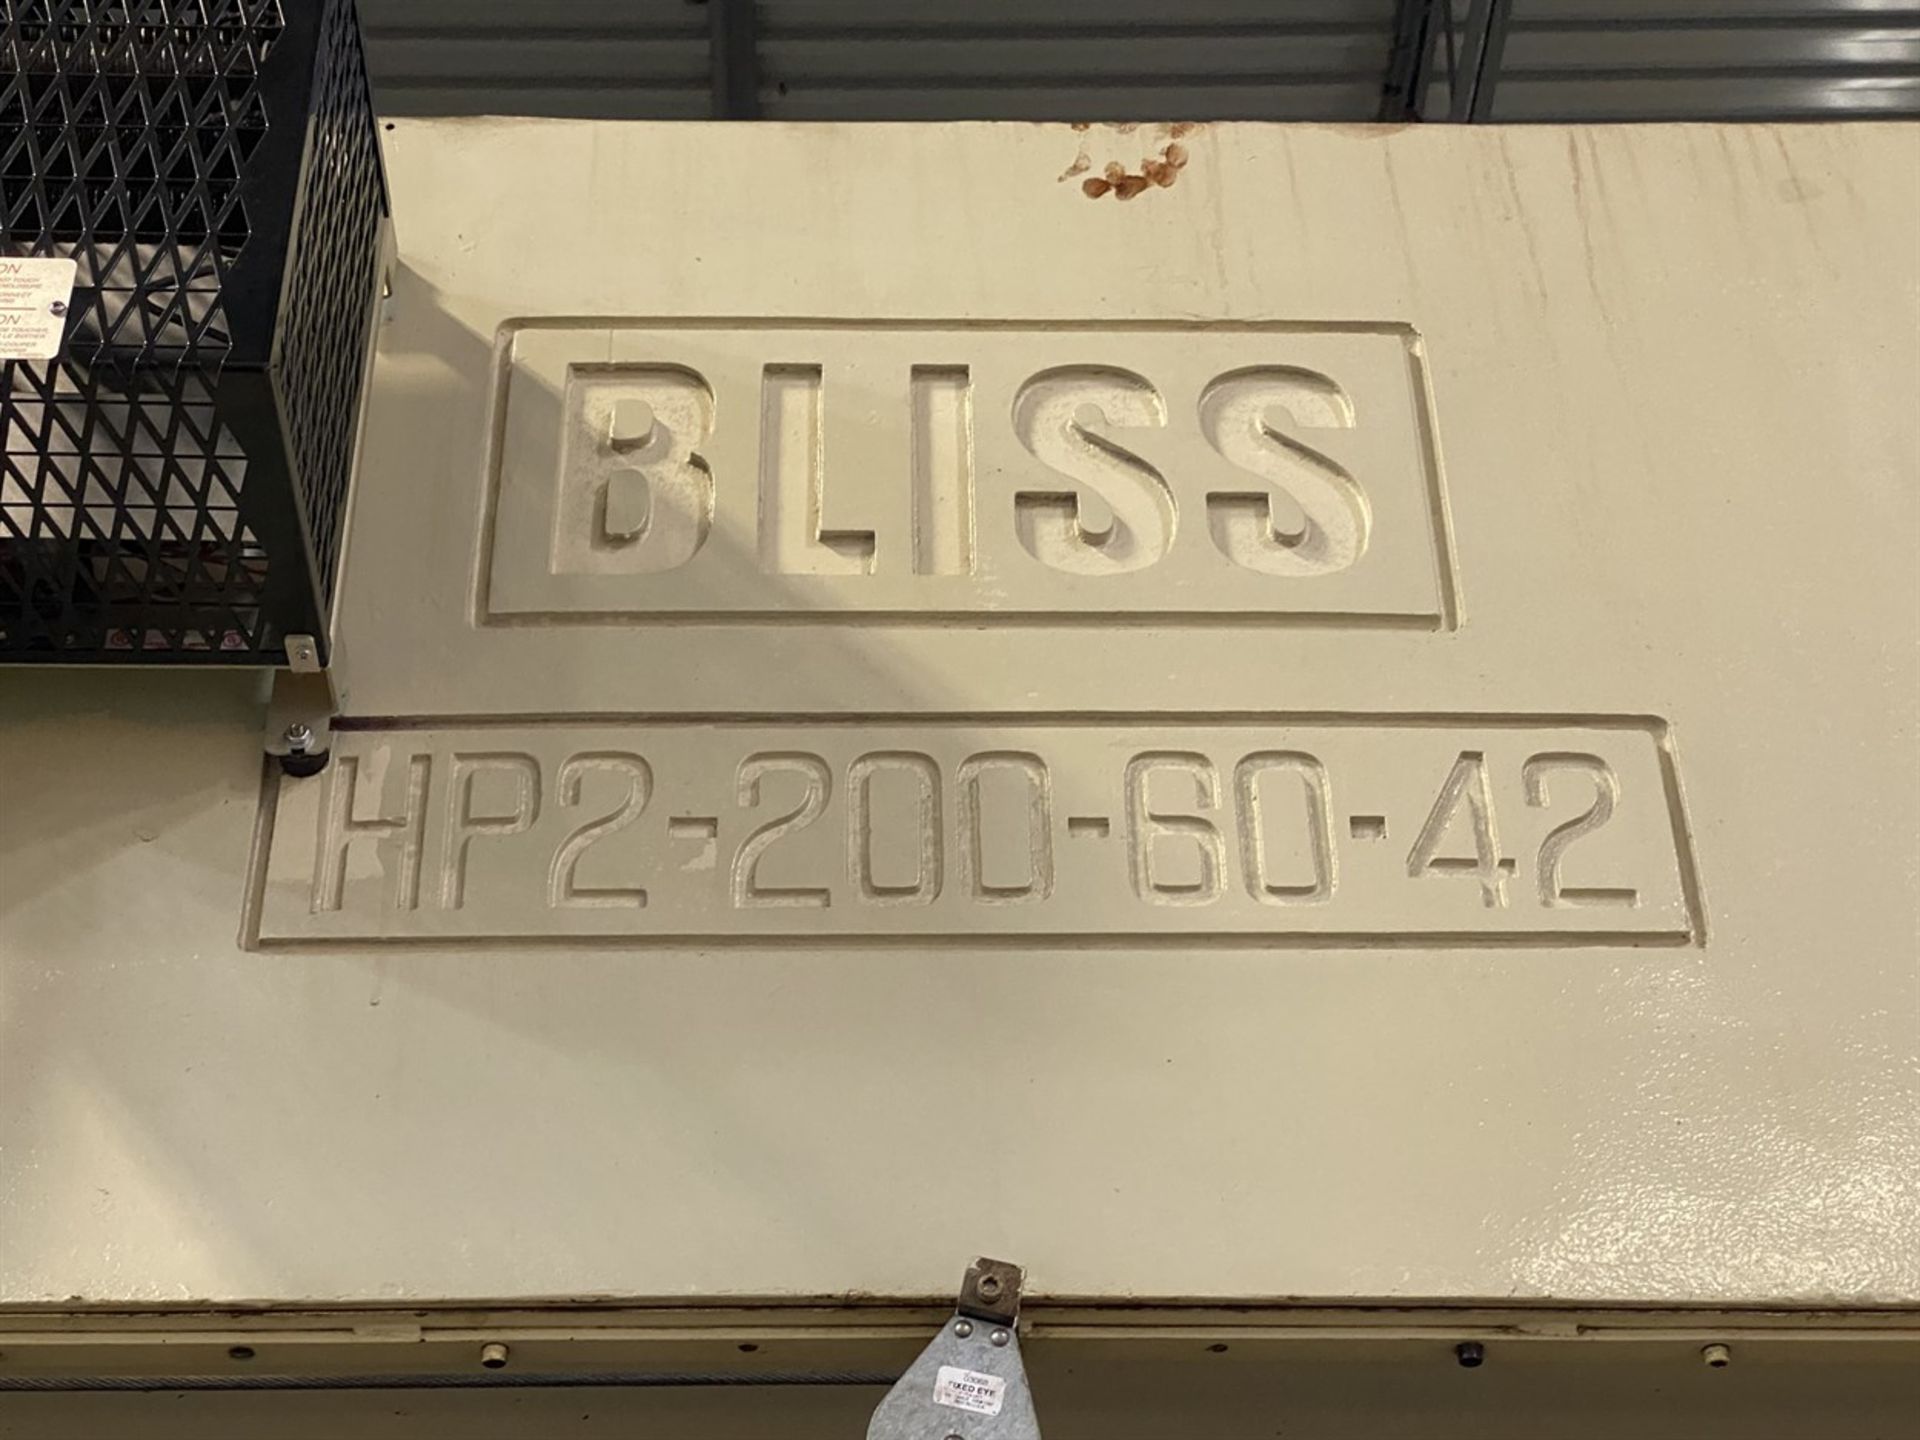 BLISS HP2-200-60-42 Straight Side Press, s/n H63044, 200 Ton Capacity, 60”x 42” Bed, 2.5” Stroke, - Image 6 of 7